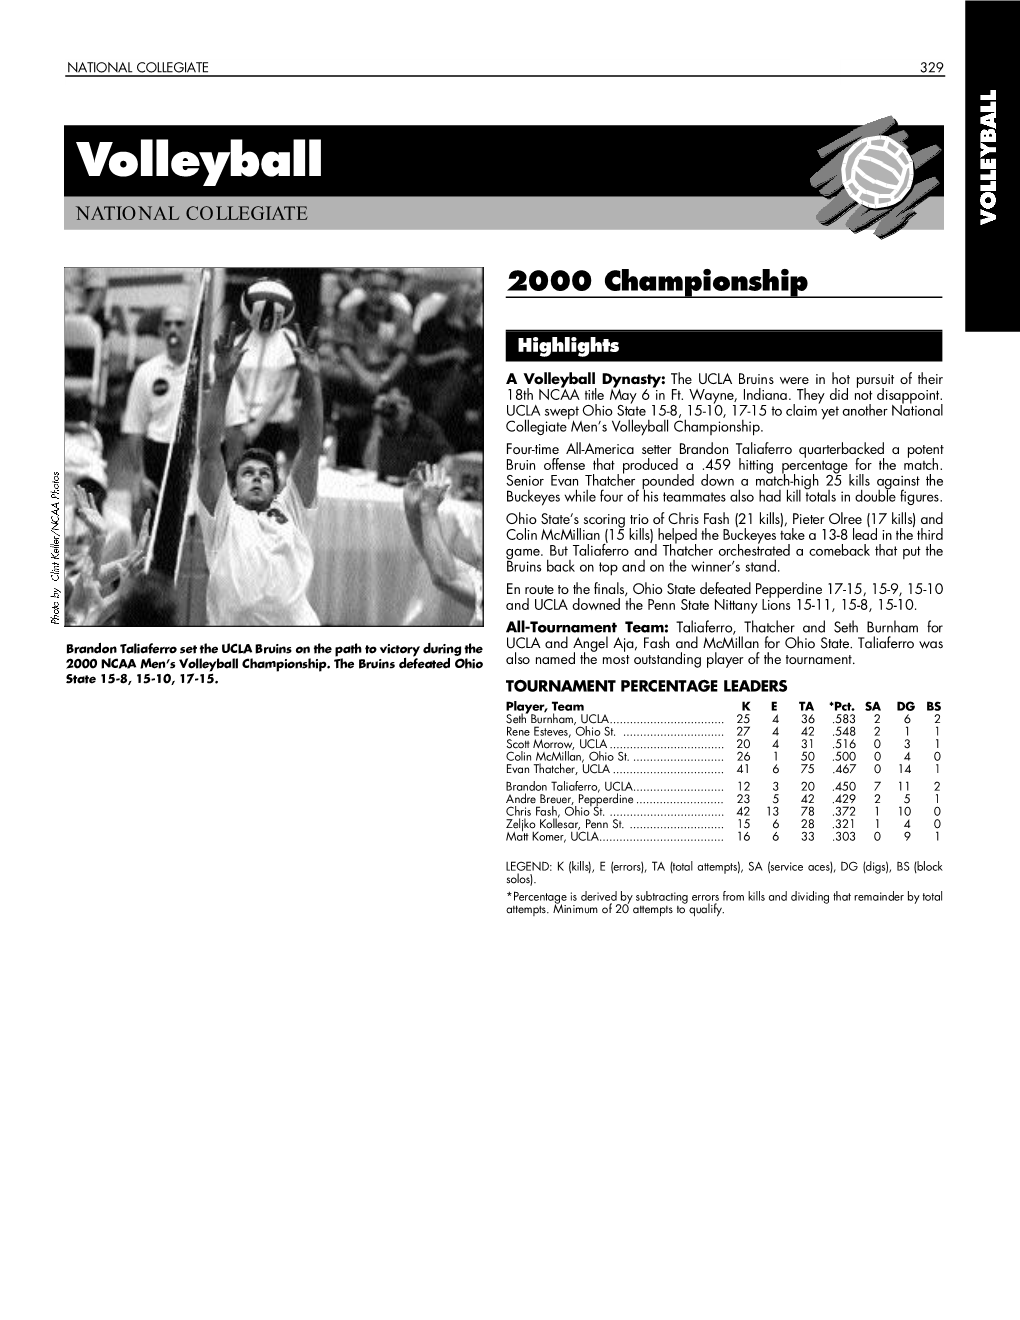 1999-00 NCAA Men's Volleyball Championship Records